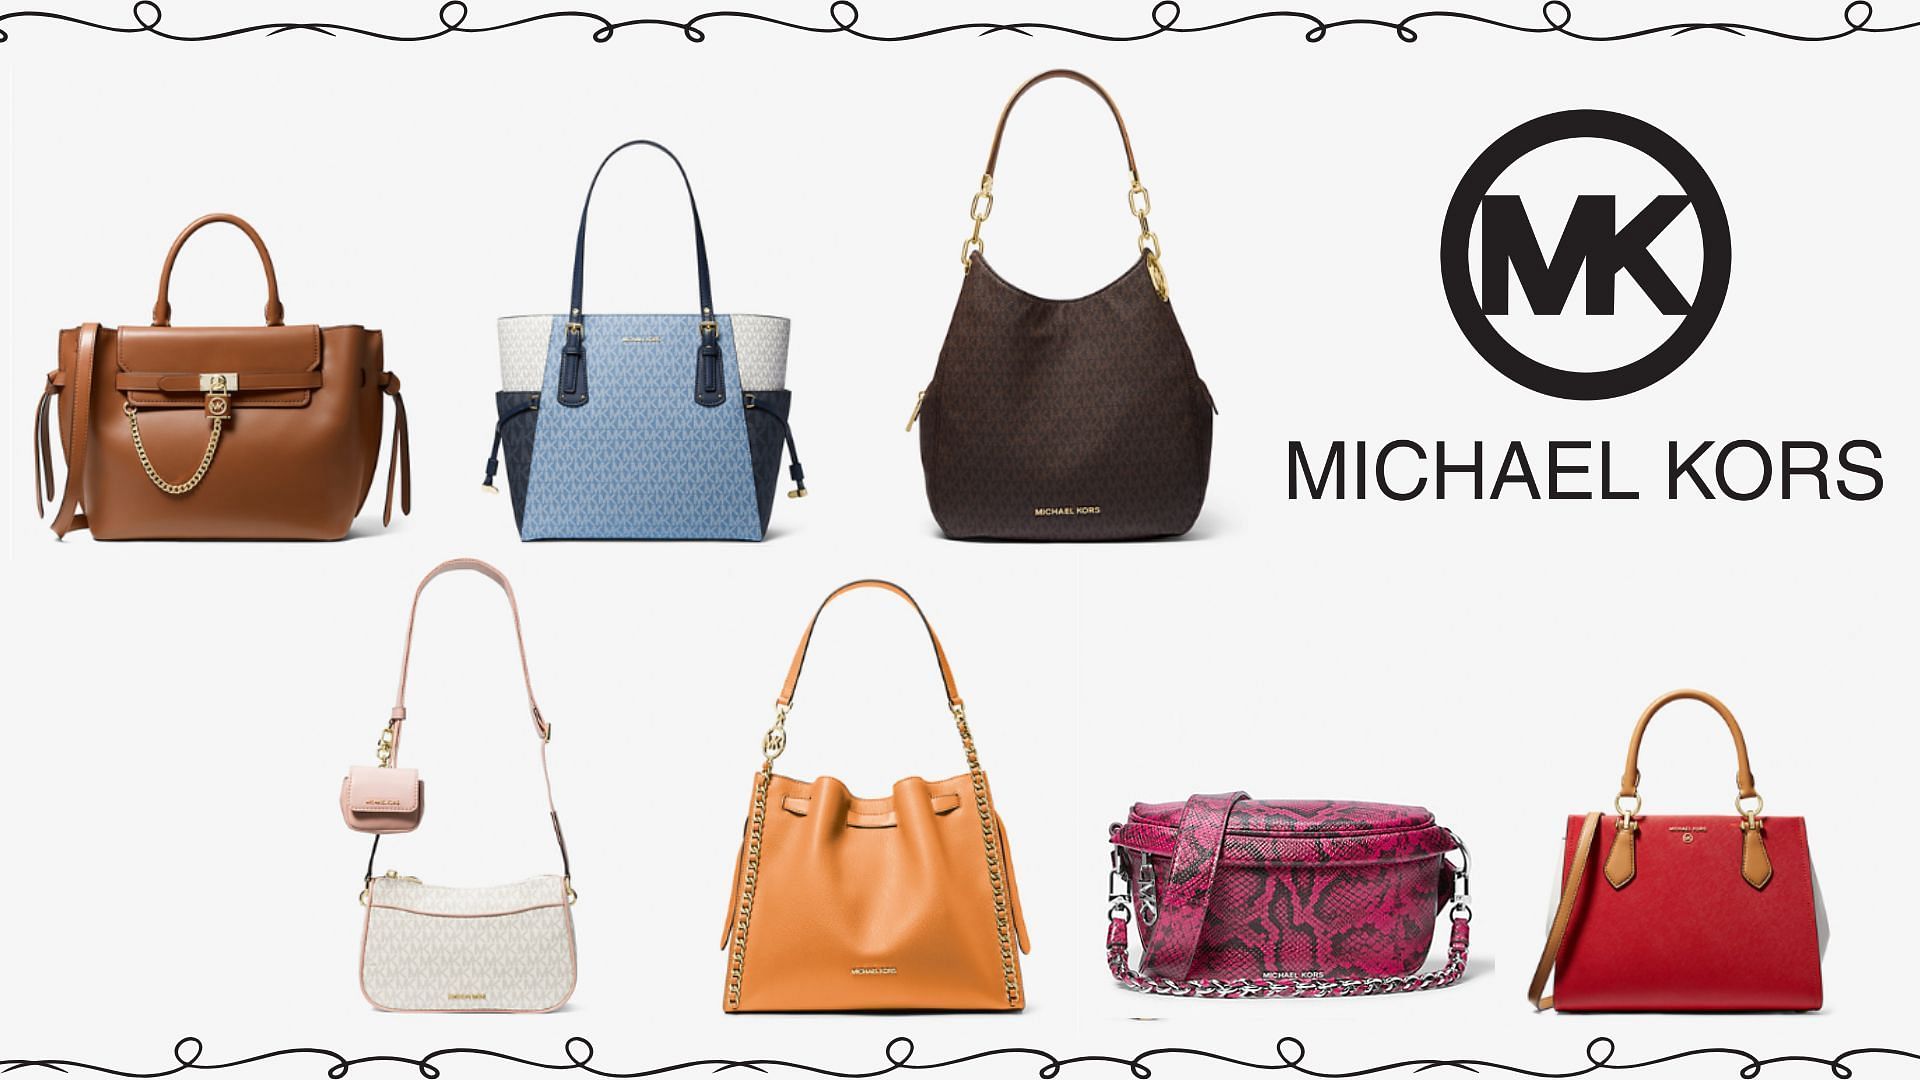 Best Michael Kors bags you can lookout for this season (Image via MK)